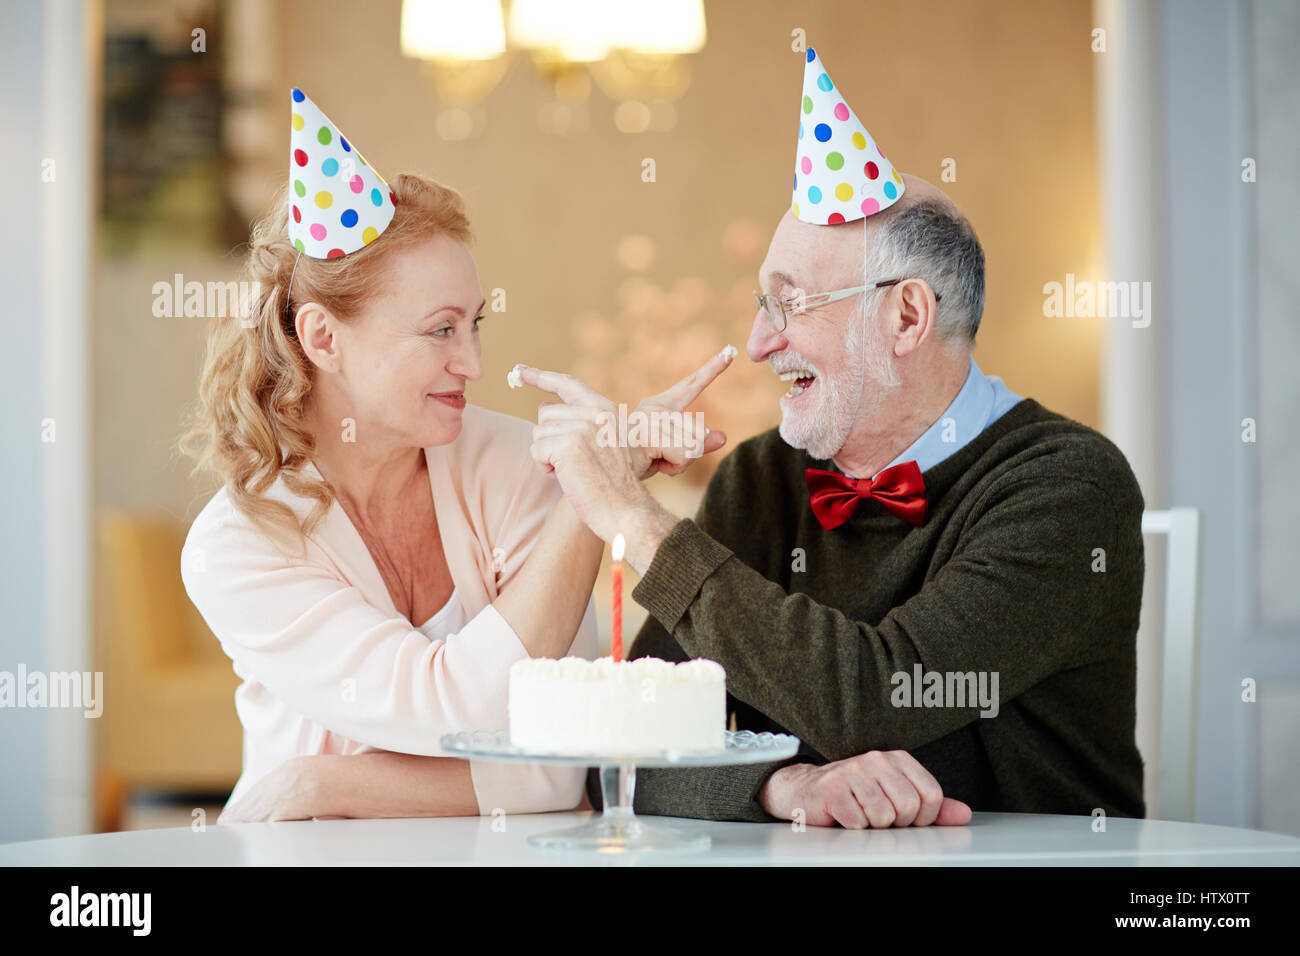 Portrait of playful senior couple sitting at table with cake and wearing party hats trying to smudge each other with cream Stock Photo